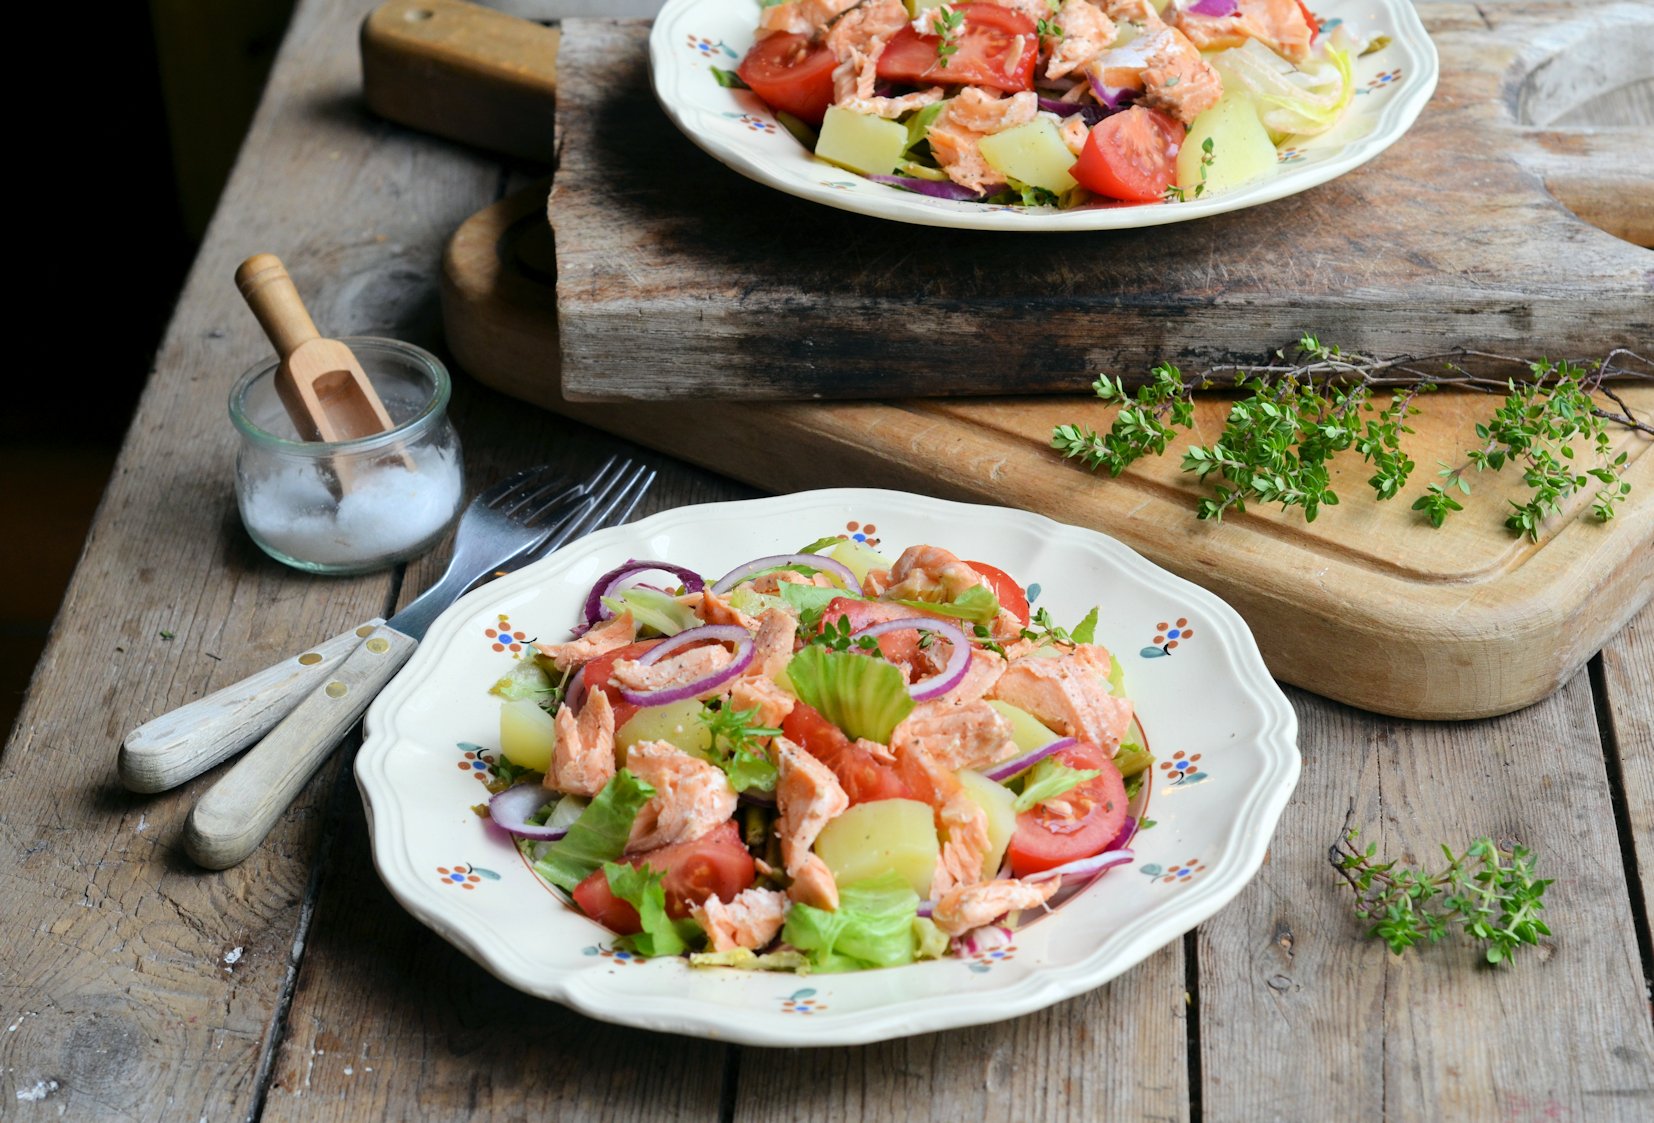 Weekly Meal Plan and Two Day Diet Recipes: Salmon Niçoise Salad (5:2 Diet)